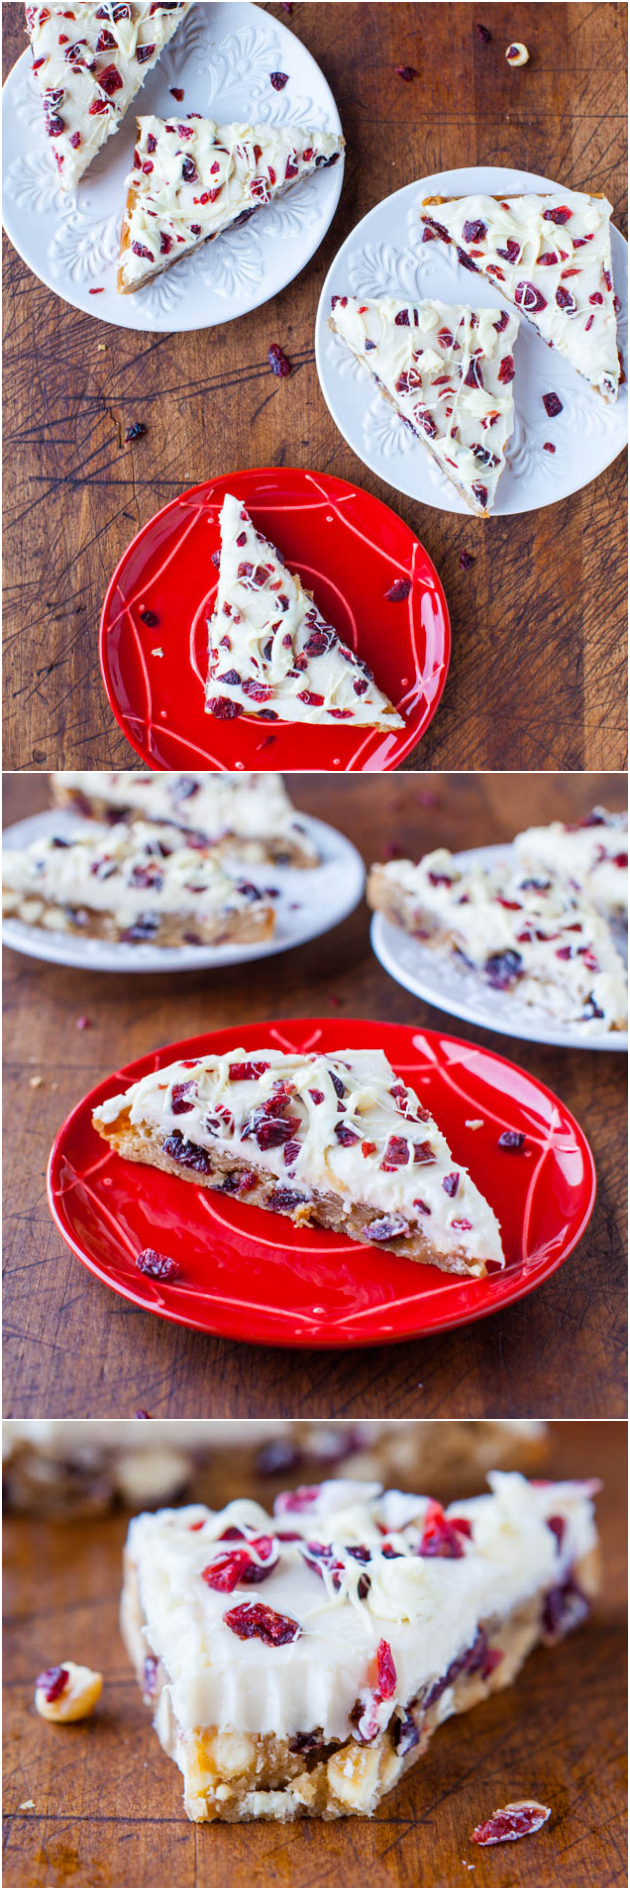 Copycat Starbucks Cranberry Bliss Bars — For anyone who loves the Starbucks version, these are can be made year-round at home for pennies on the dollar and taste every bit as fabulous and then some!!